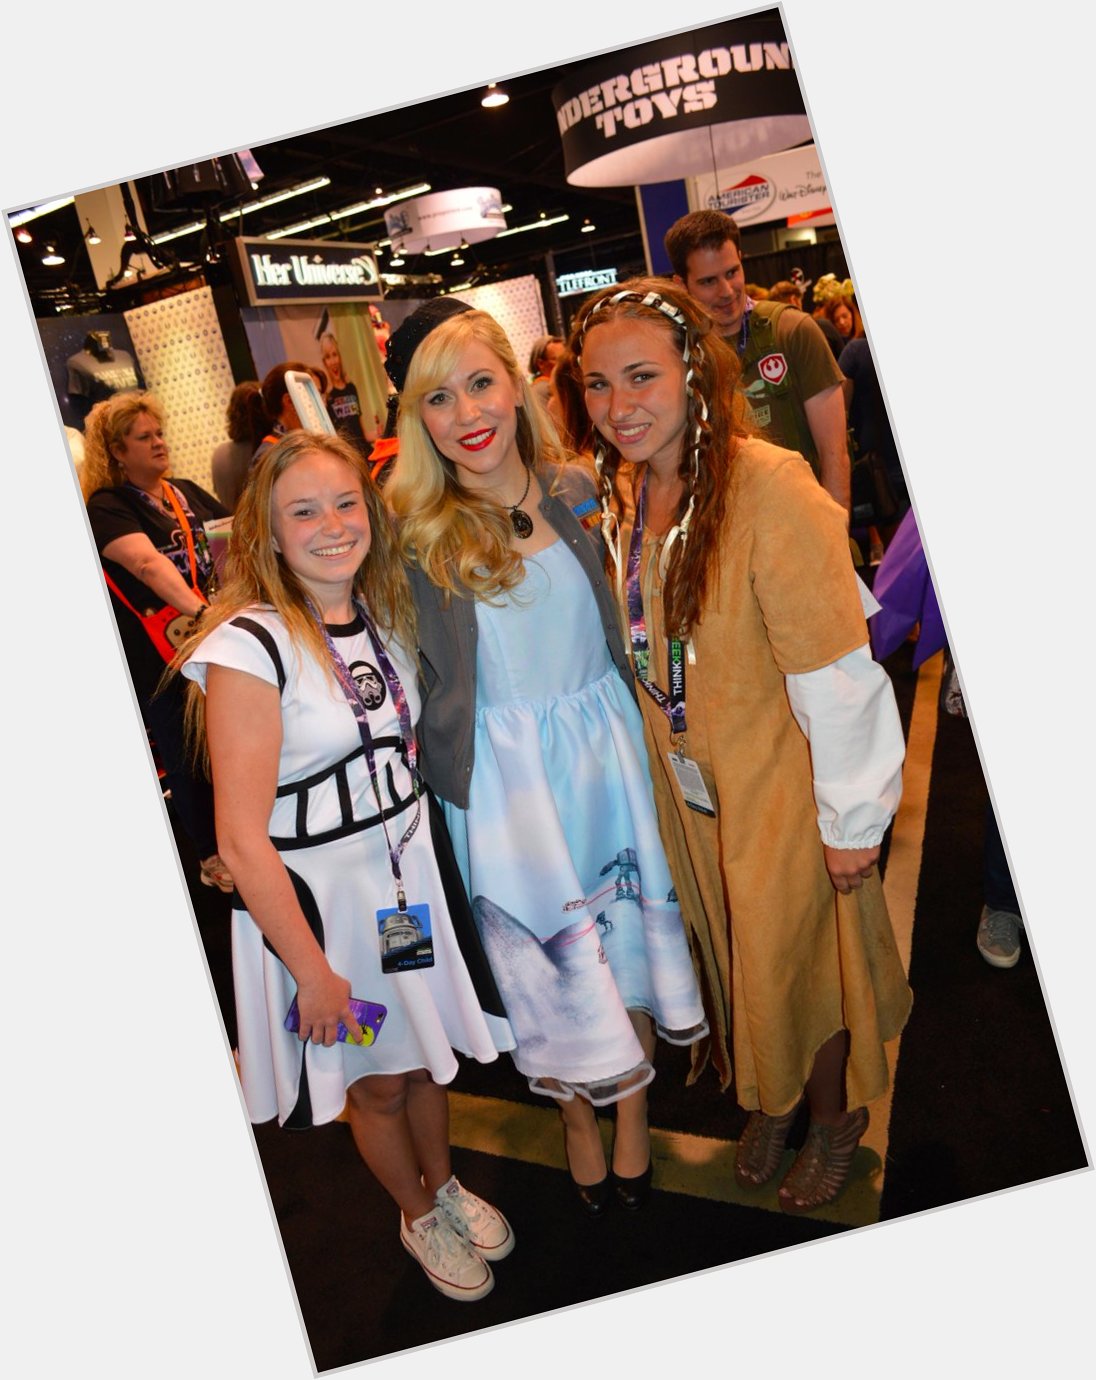 Happy Birthday to Ashley Eckstein - May the force be with you as always! <3 